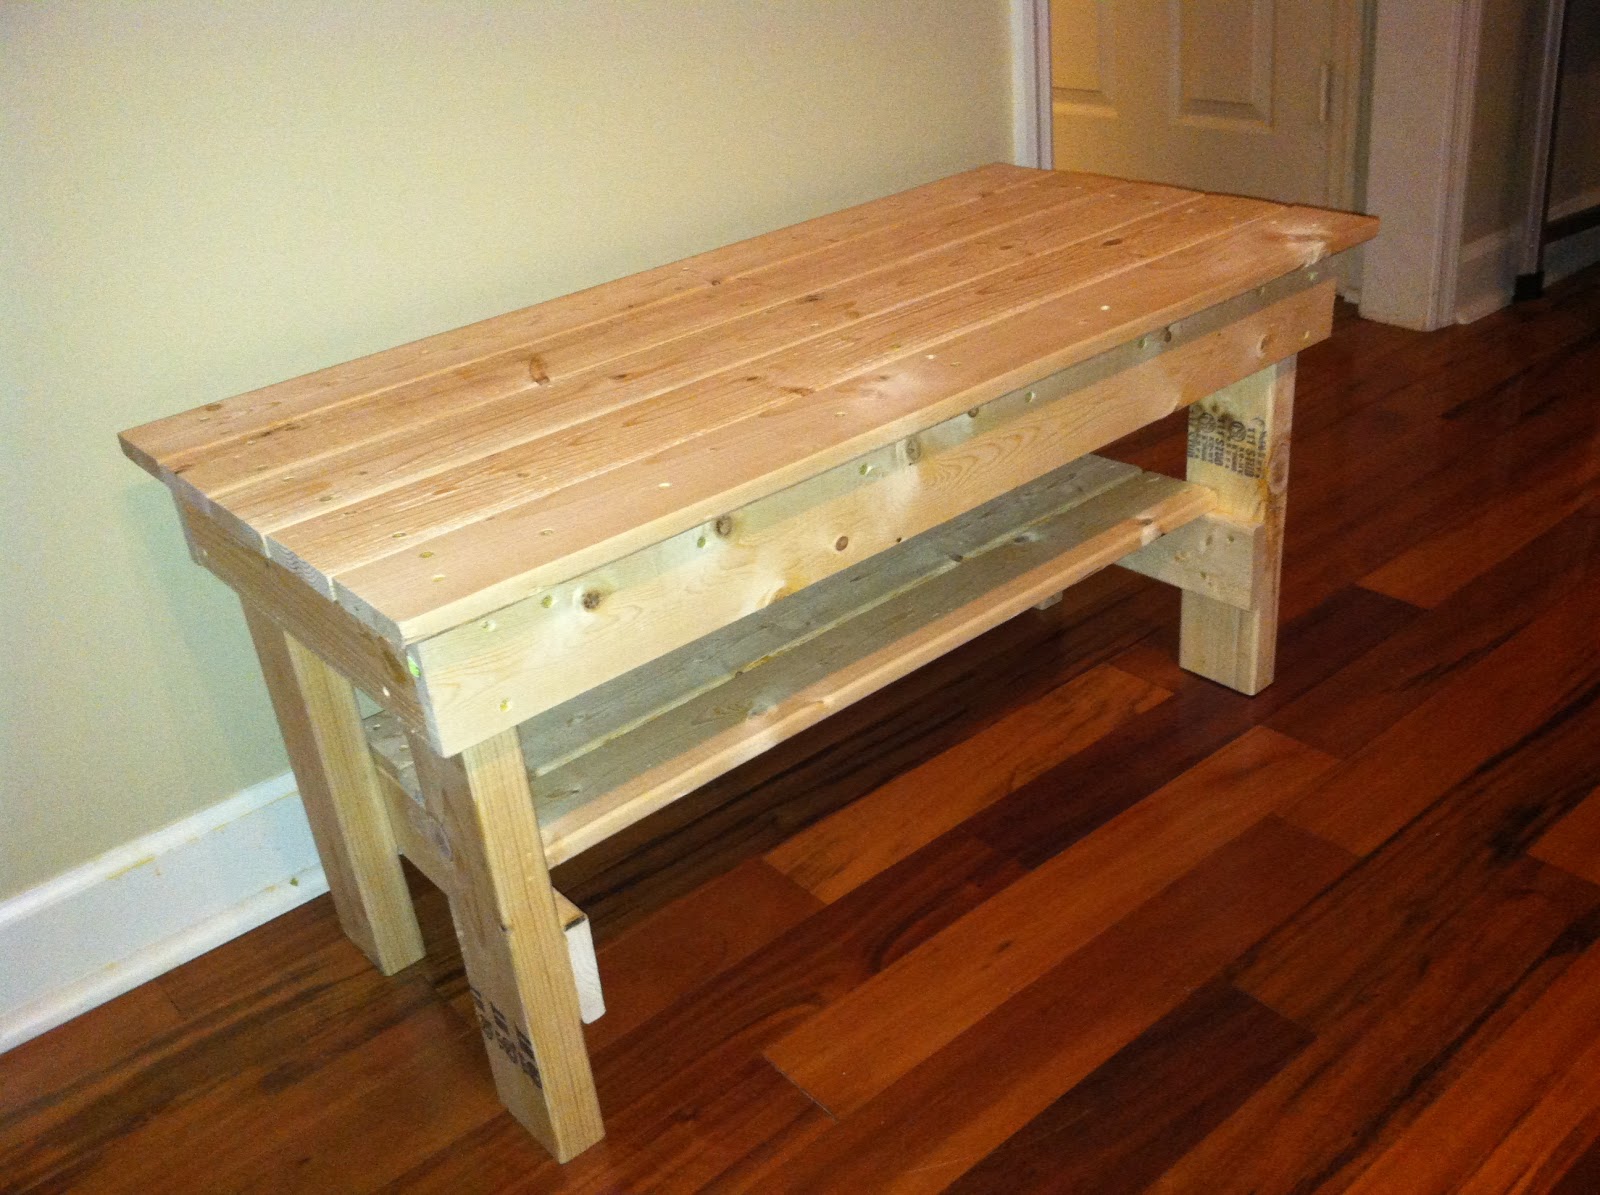 Bench Plans http://chetsproducts.blogspot.com/2013/01/wooden-bench 